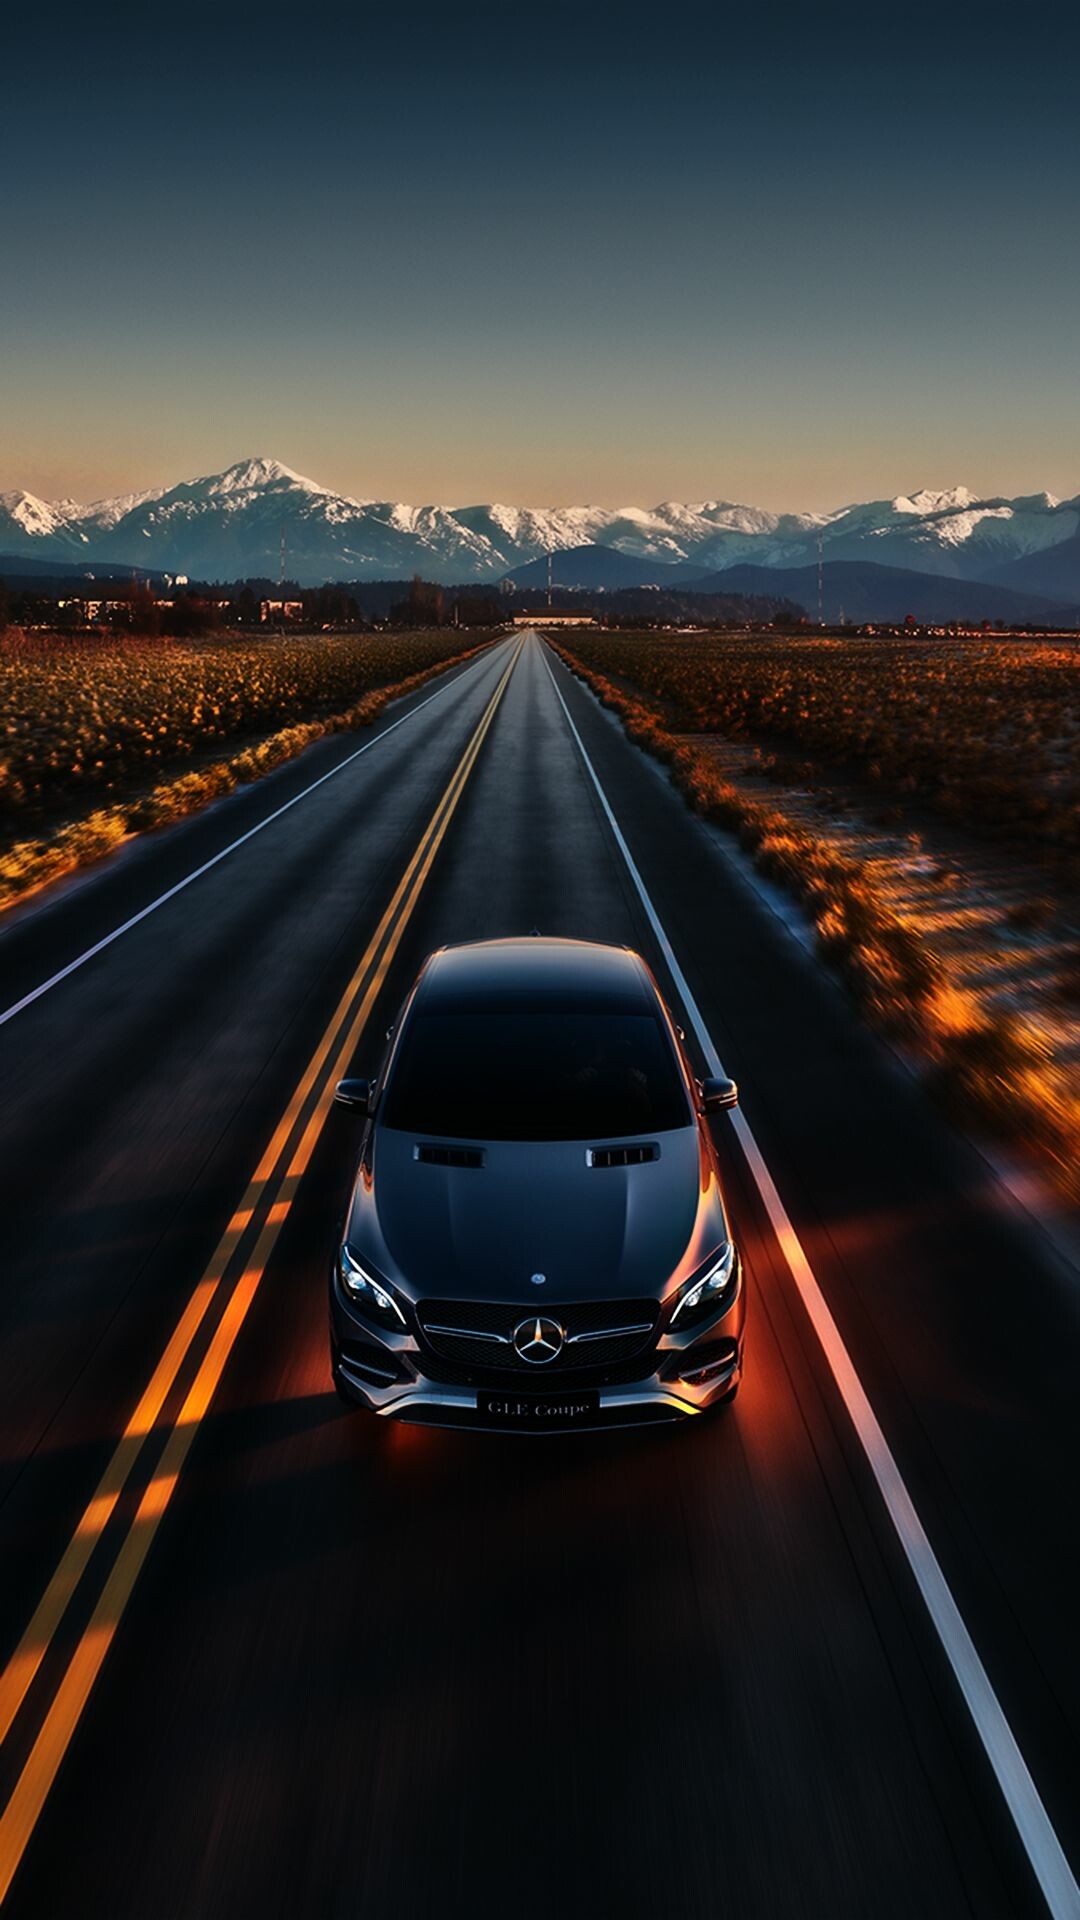 Mercedes-Benz: The slogan for the brand is "the best or nothing". 1080x1920 Full HD Wallpaper.